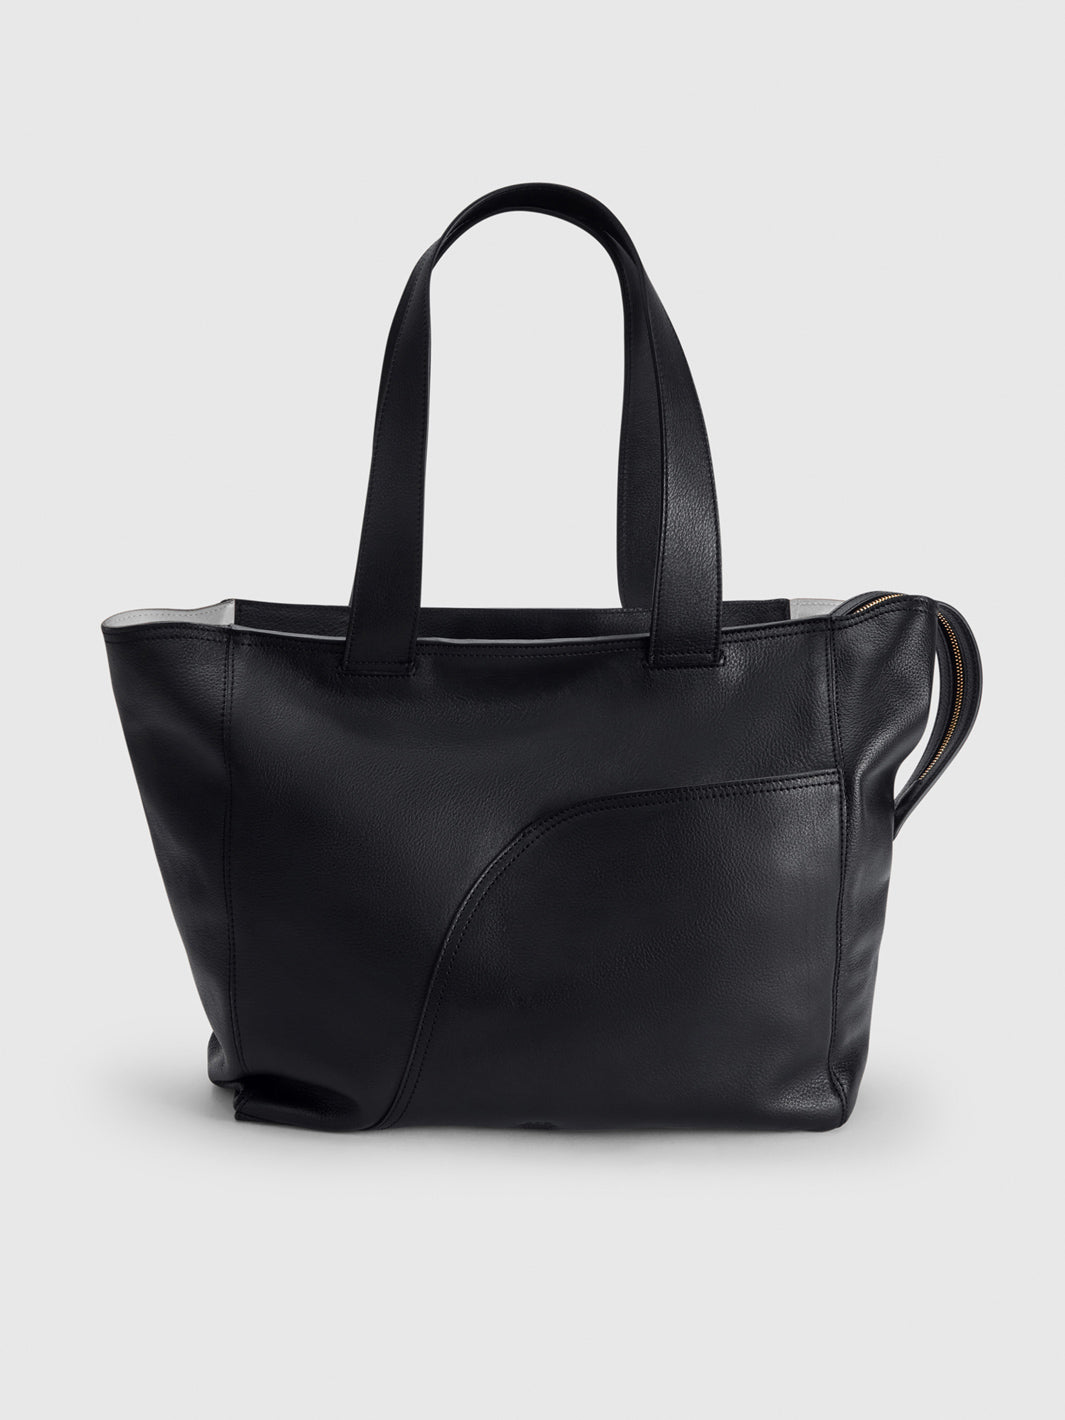 Treviso Black Grained Leather/Leather Large Tote bag